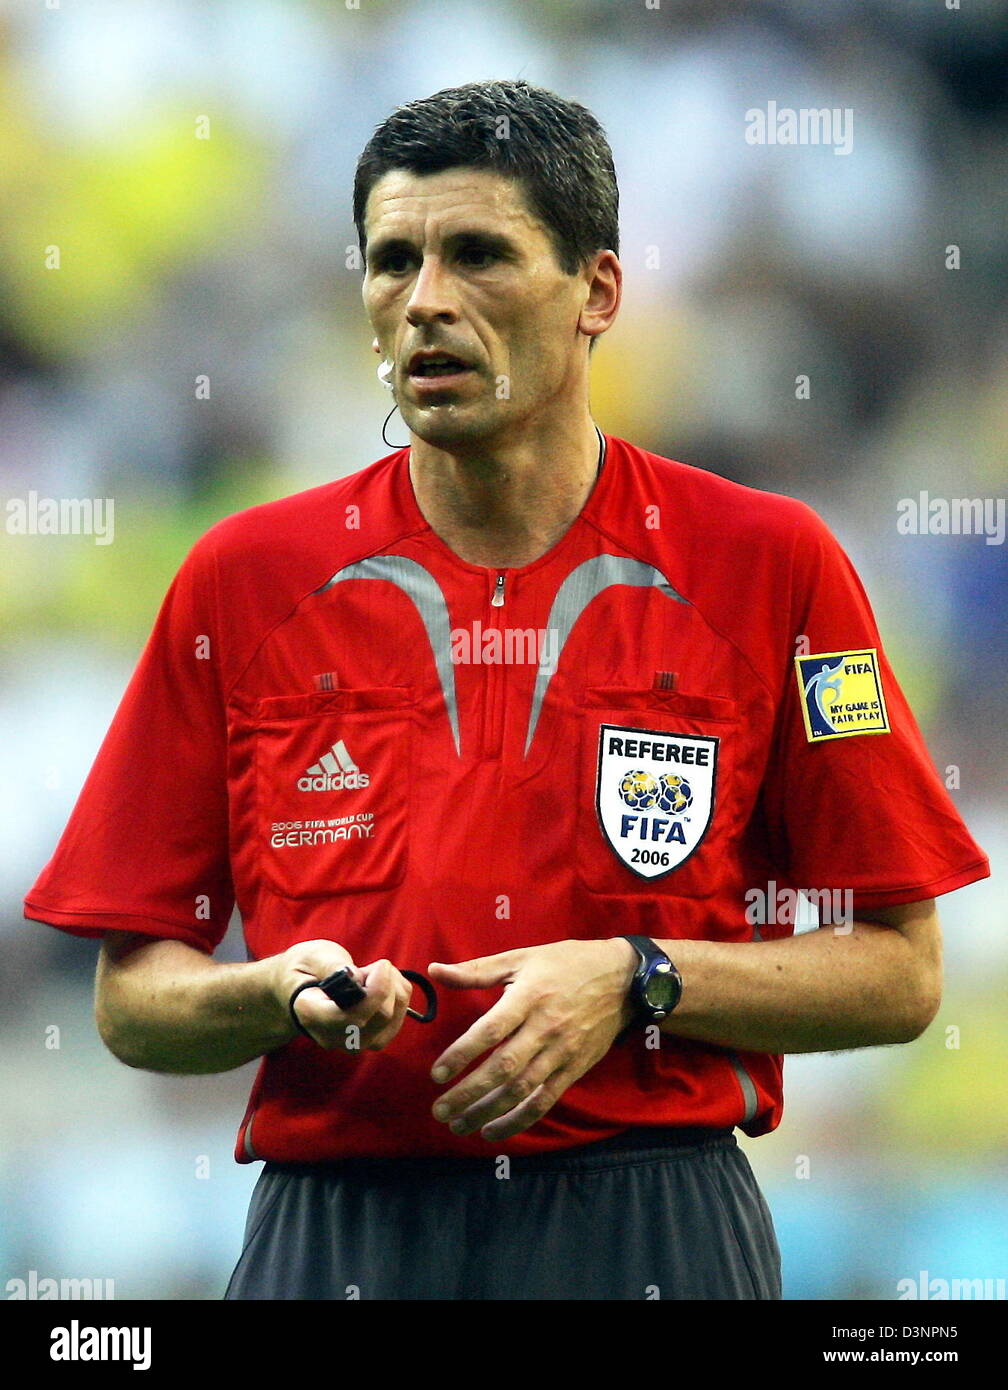 German referee Markus Merk shwon during the group F match of the 2006 FIFA World Cup between Brazil and Australia in Munich, Germany, Sunday, 18 June 2006. Photo: MATTHIAS SCHRADER +++ Mobile Services OUT +++ Please refer to FIFA's Terms and Conditions Stock Photo